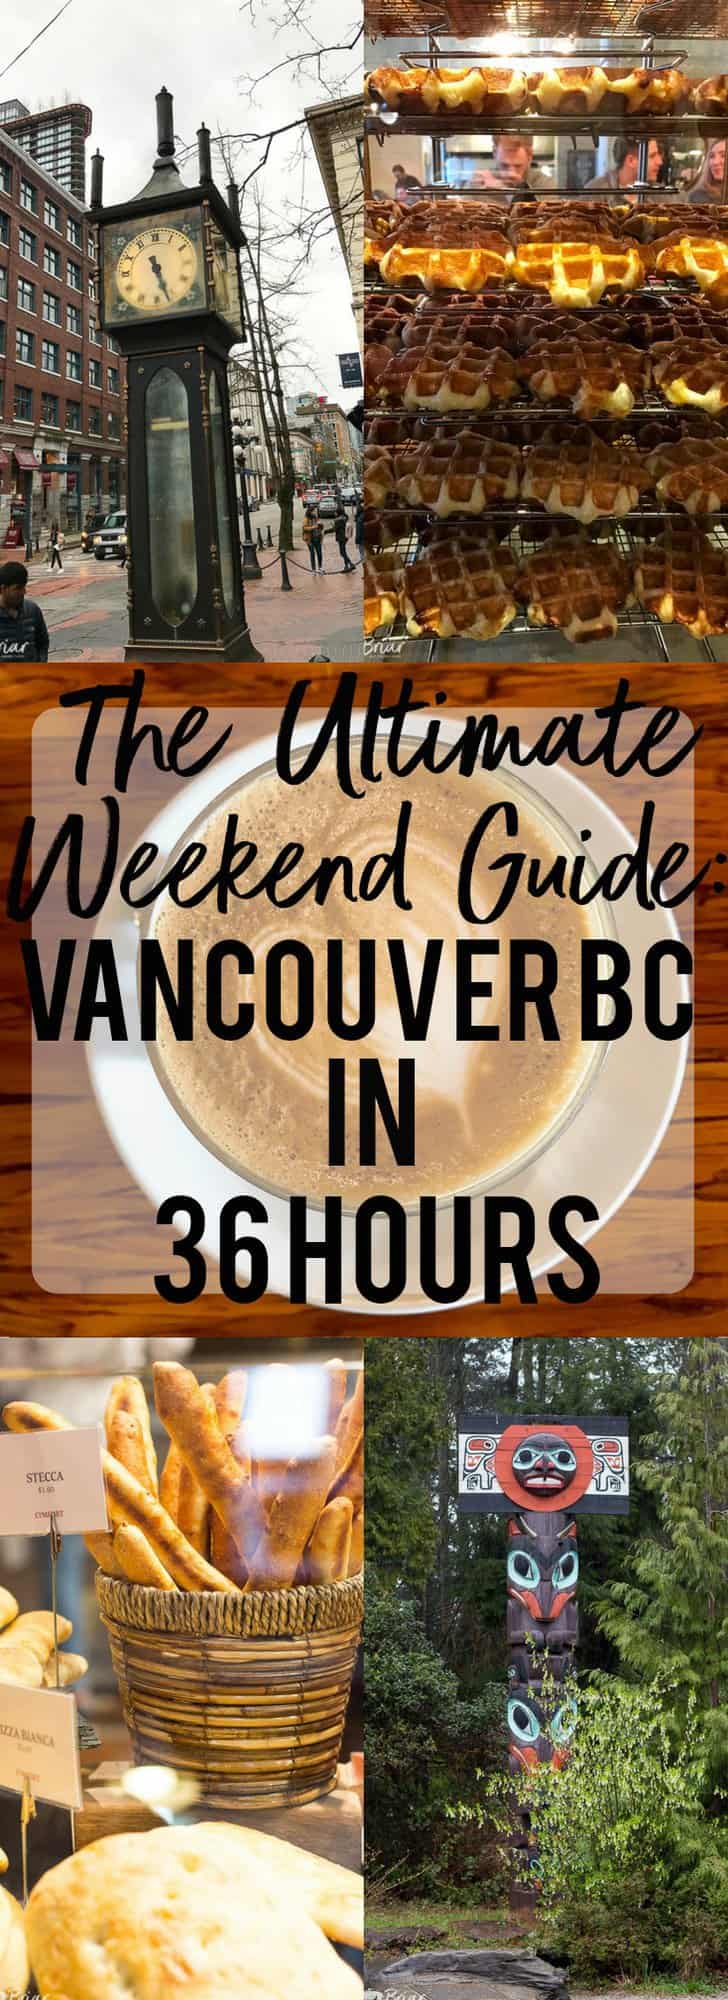 What to do and where to eat in Vancouver, B.C. The Ultimate Weekend Travel Guide! How to spend 36 hours in Vancouver, Canada. | Best places to eat in vancouver | tourist attractions Vancouver BC | Weekend trip to Vancouver | Things to do in Vancouver